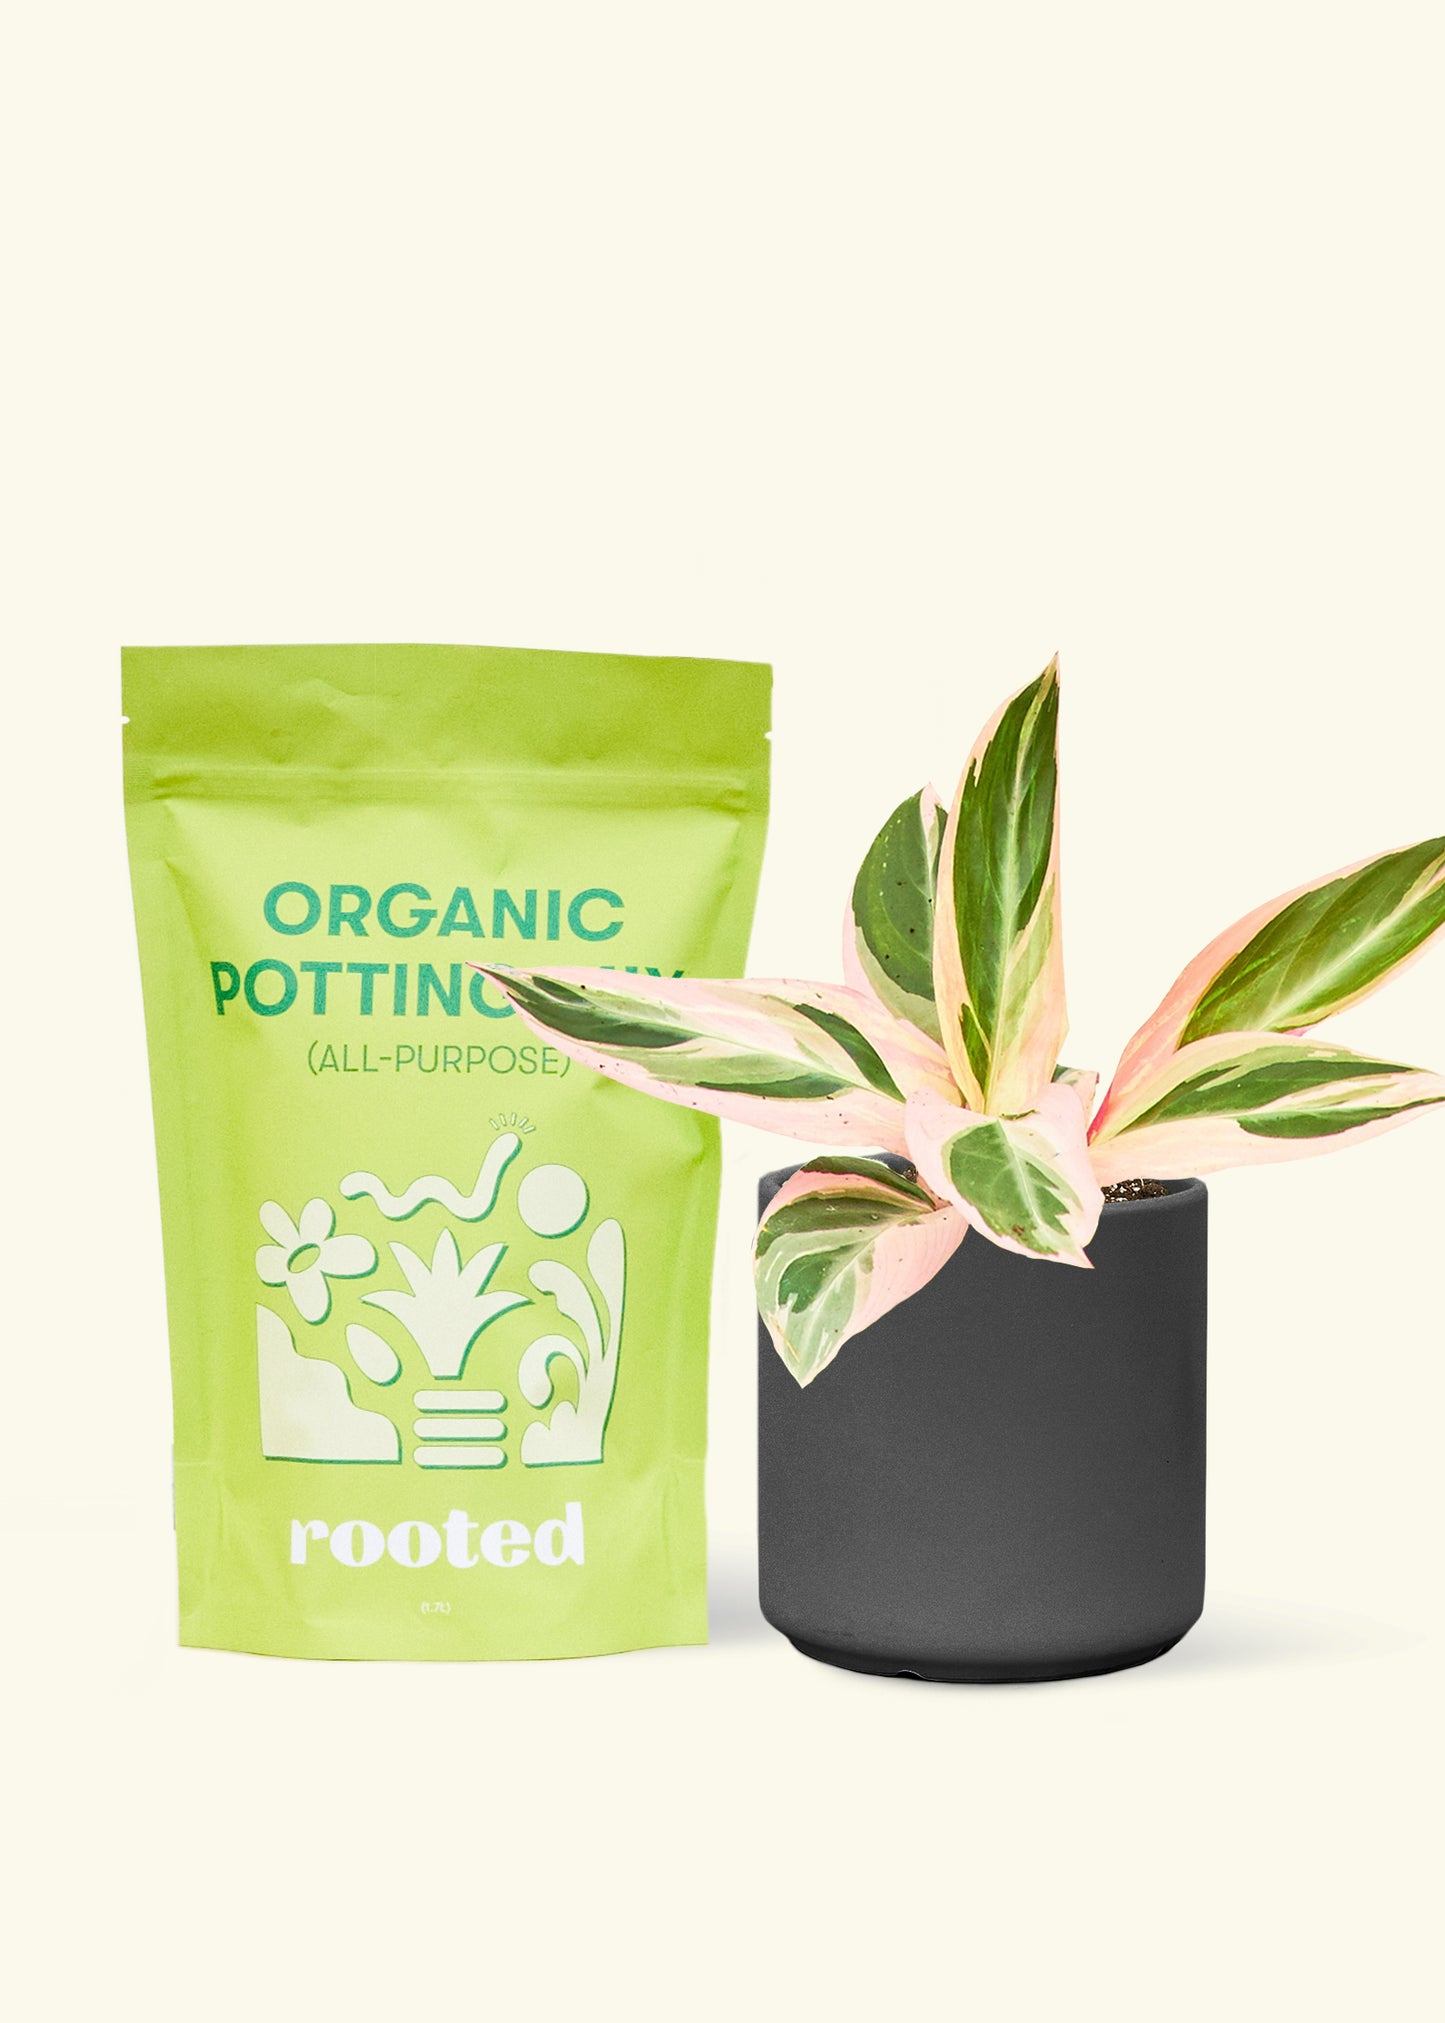 A bag of Organic Potting Mix to the left of a Stromanthe 'Triostar' in a black cylinder ceramic pot.